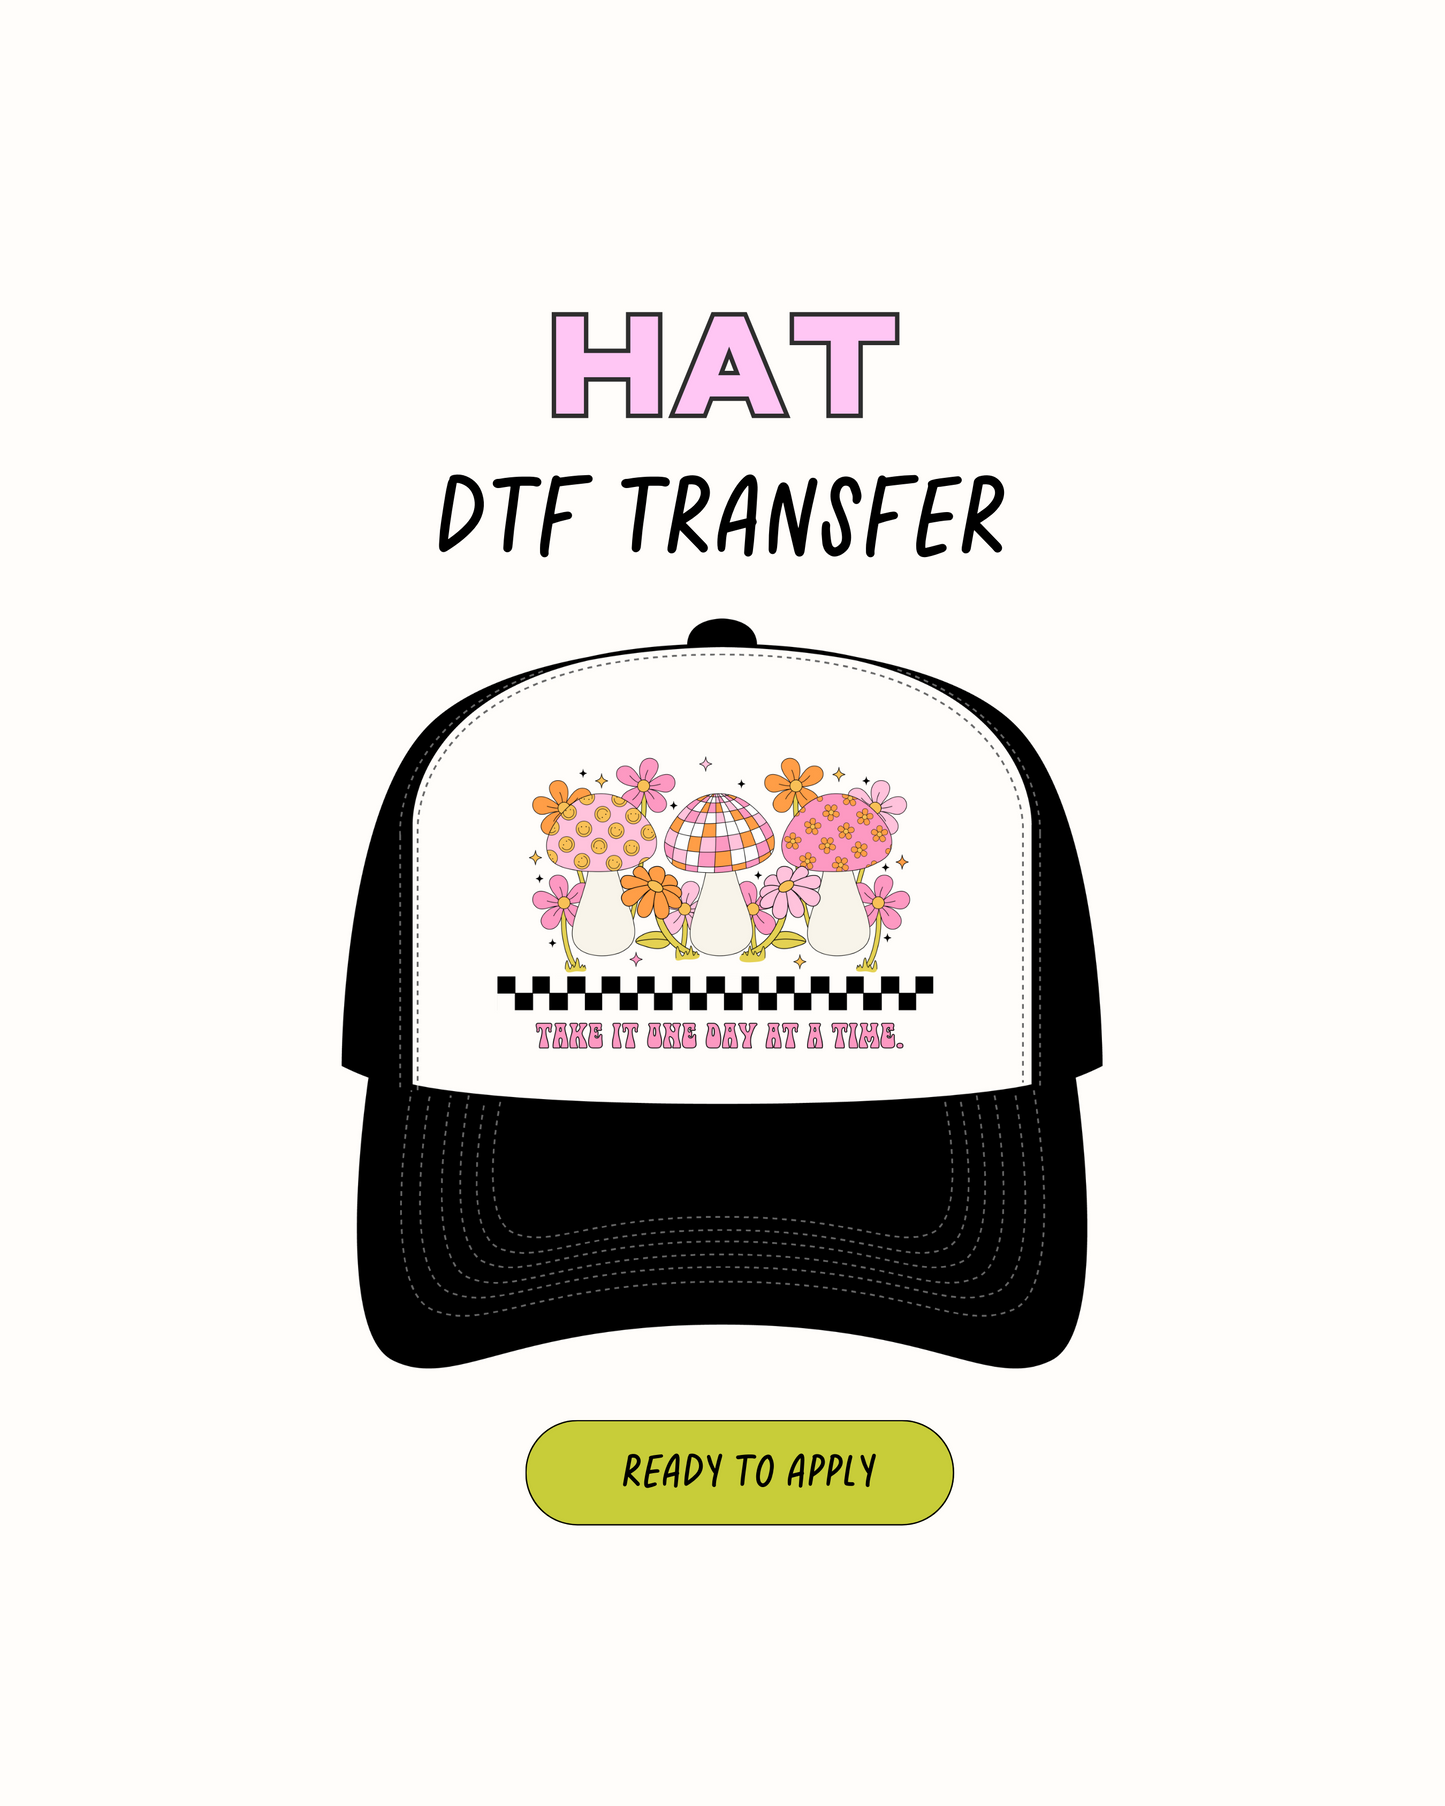 One day at a time - DTF Hat Transfers